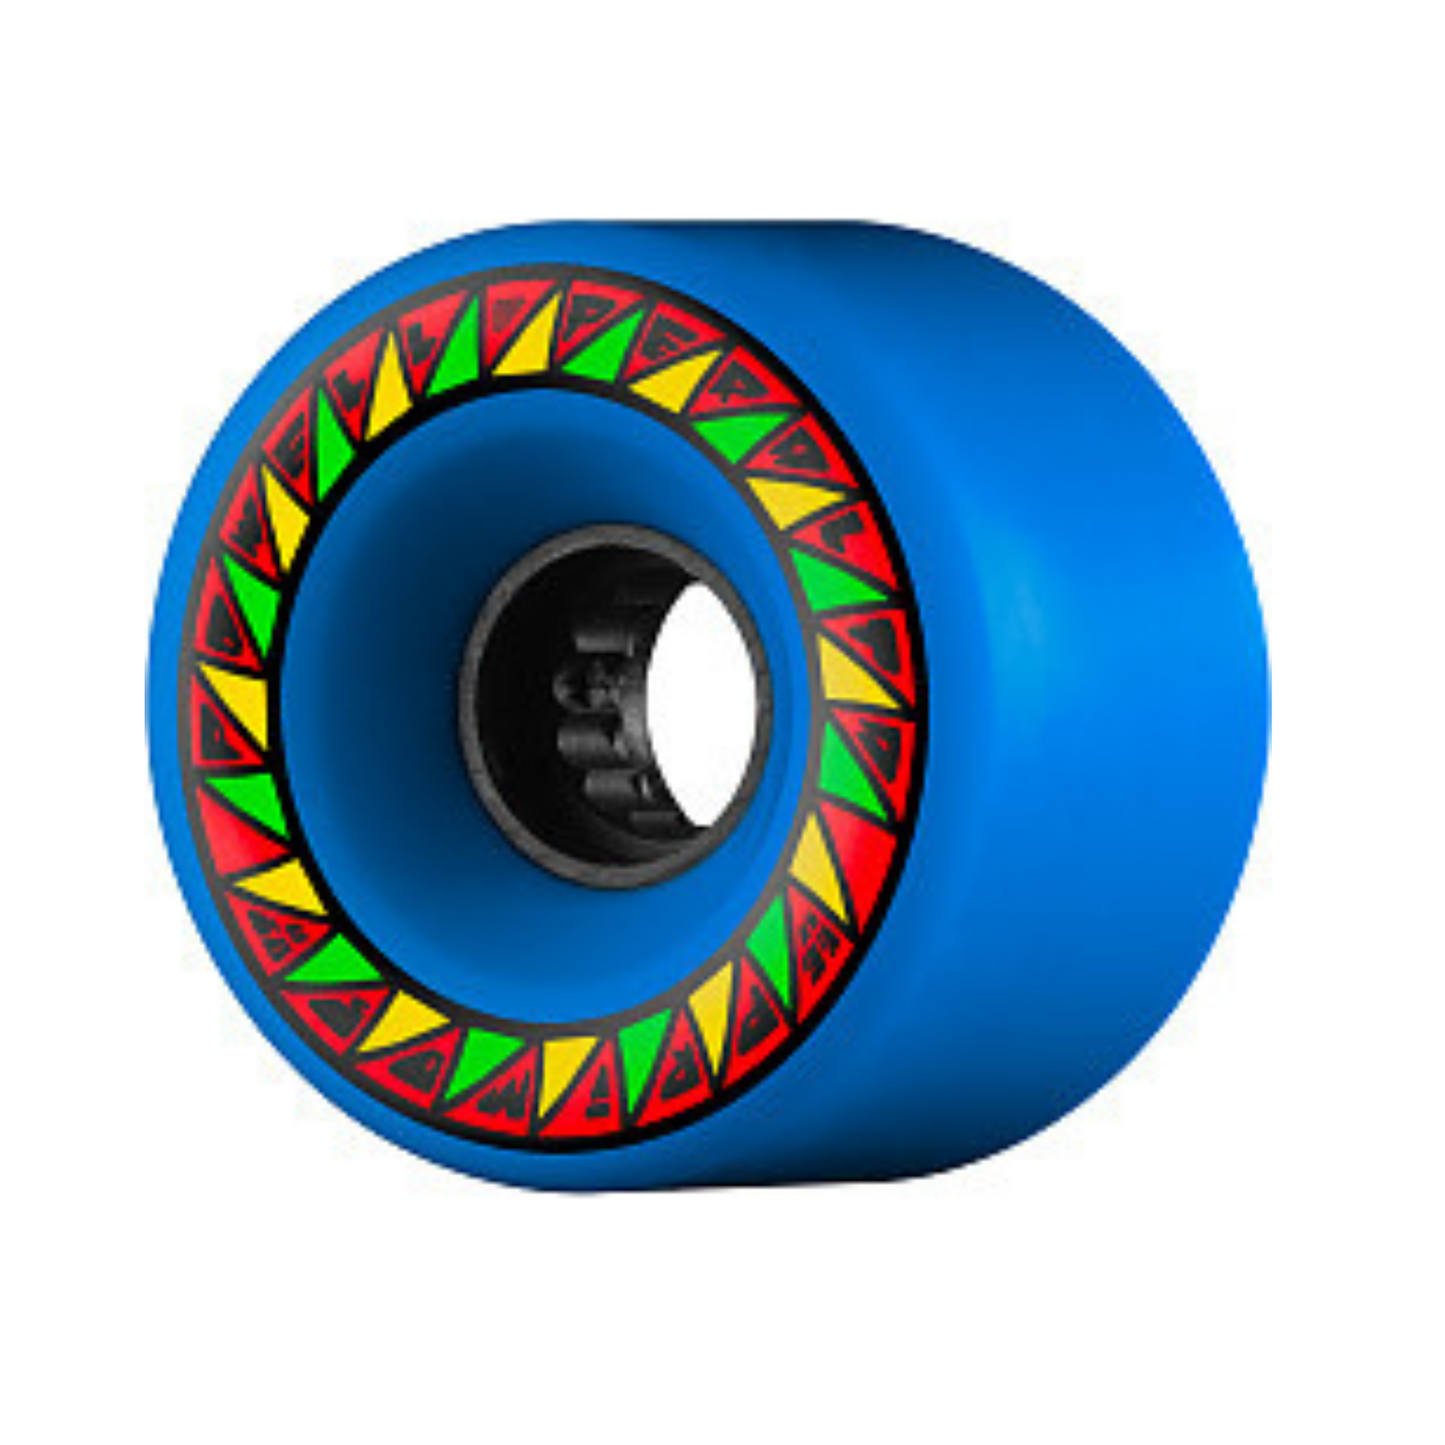 Powell Peralta Primo Wheels 66mm 82a - Blue